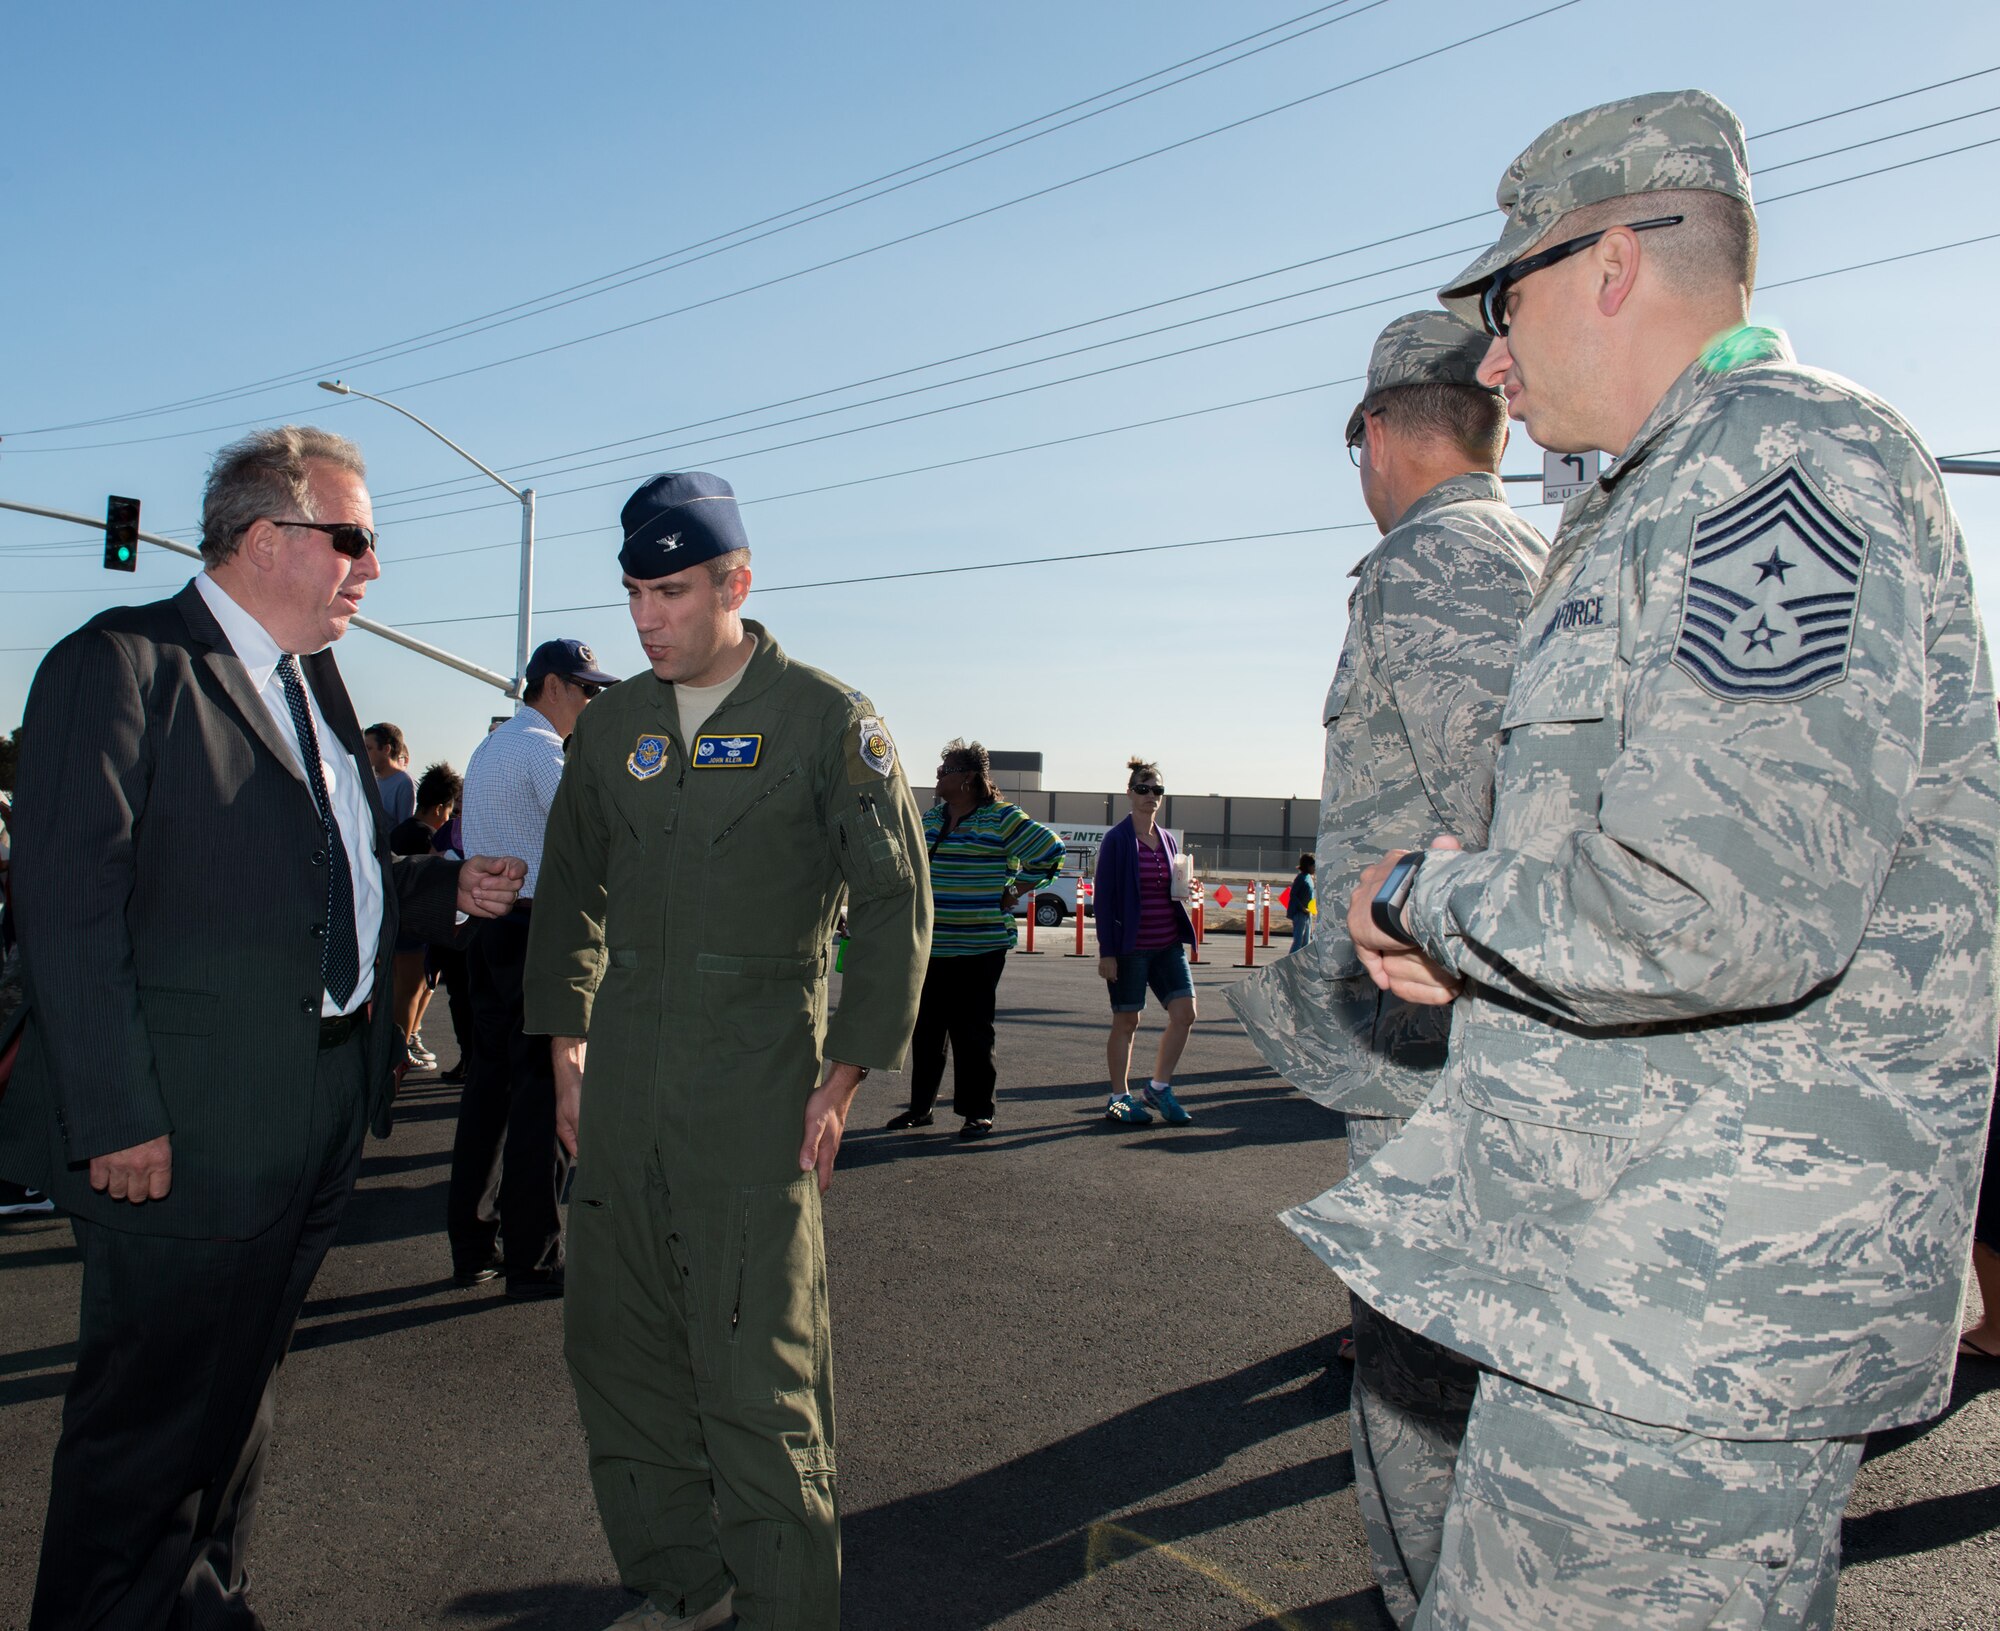 U.S. Air Force Col. John Klein, 60th Air Mobility Wing commander, at Travis Air Force Base, Calif., speaks with assembly member Bill Dodd, 4th District Calif., before the Peabody Road reopening ceremony in Fairfield, Calif., Aug. 4, 2016. The road was closed for 14-months and finished ten days ahead of schedule. Peabody Road is a major thoroughfare that connects the cities of Vacaville and Fairfield, more than 20,000 vehicles per day use the road and it is also a major artery into Travis Air Force Base for more than 14,000 employees. The construction of the Peabody Road overpass is part of the new Fairfield-Vacaville train station project along the Capitol Corridor. (U.S. Air Force photo by Louis Briscese) 